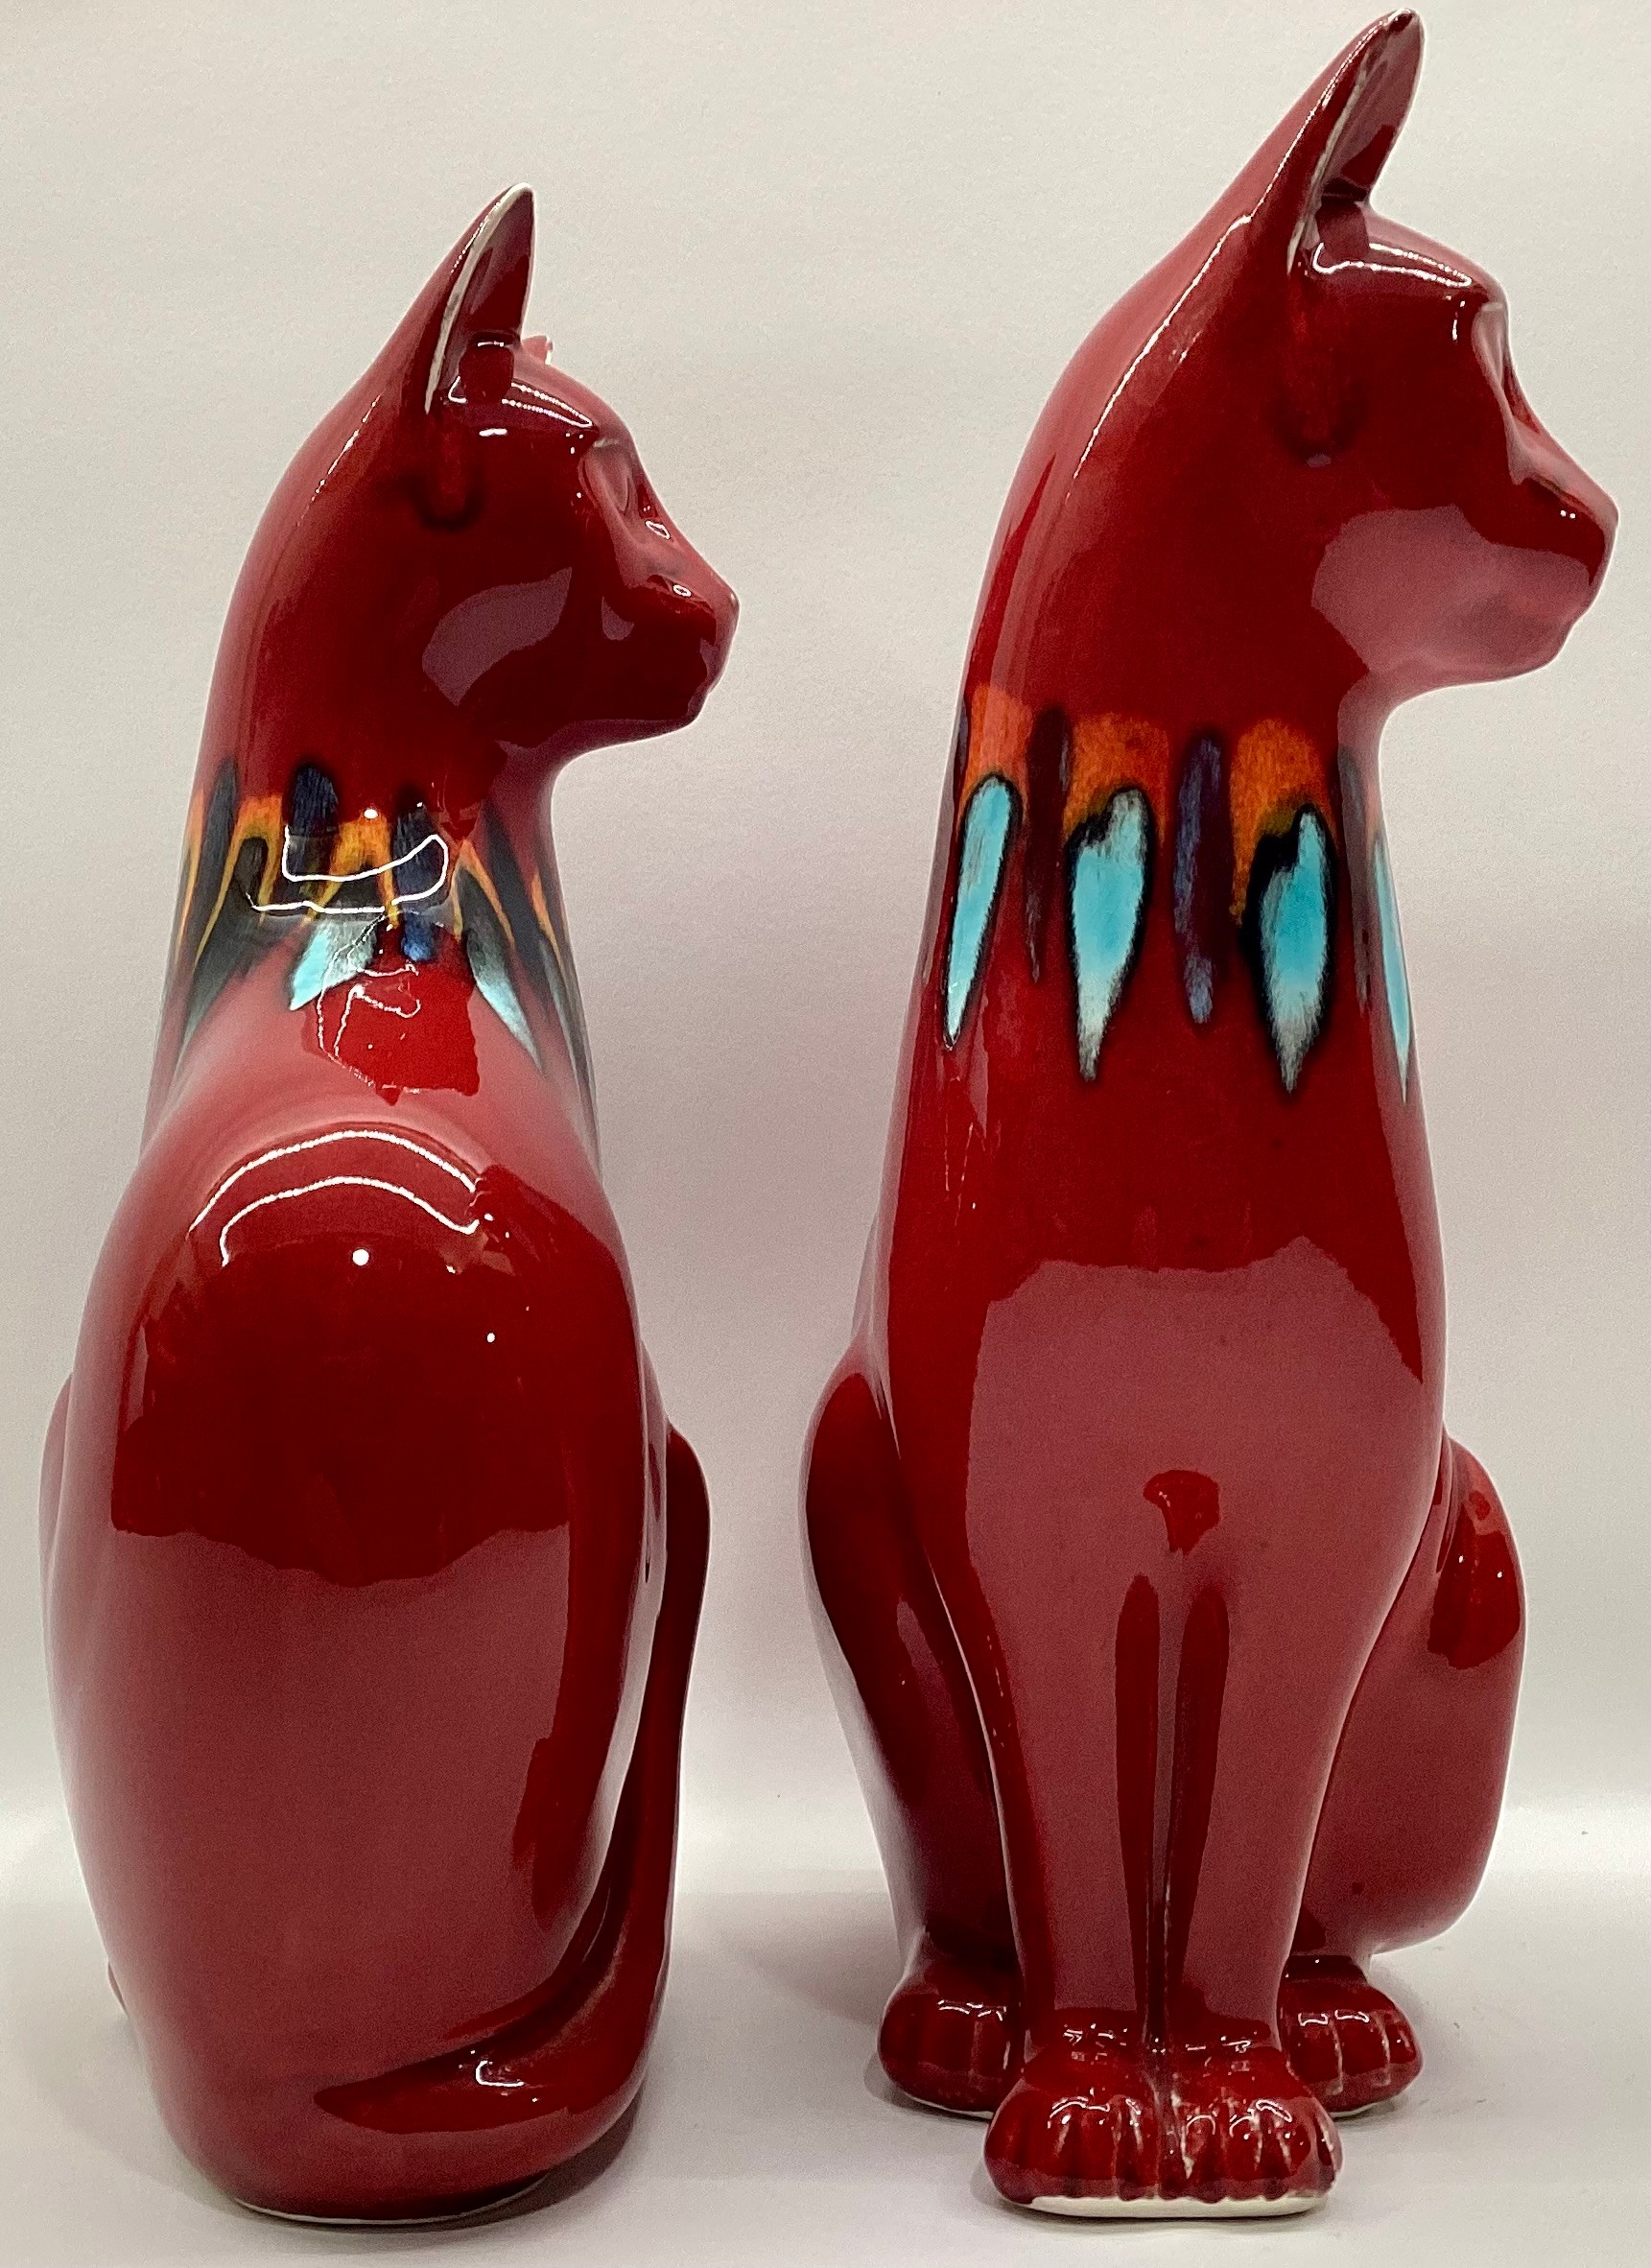 Poole Pottery pair of large living glaze red cats 11.25" high (2) - Image 2 of 4